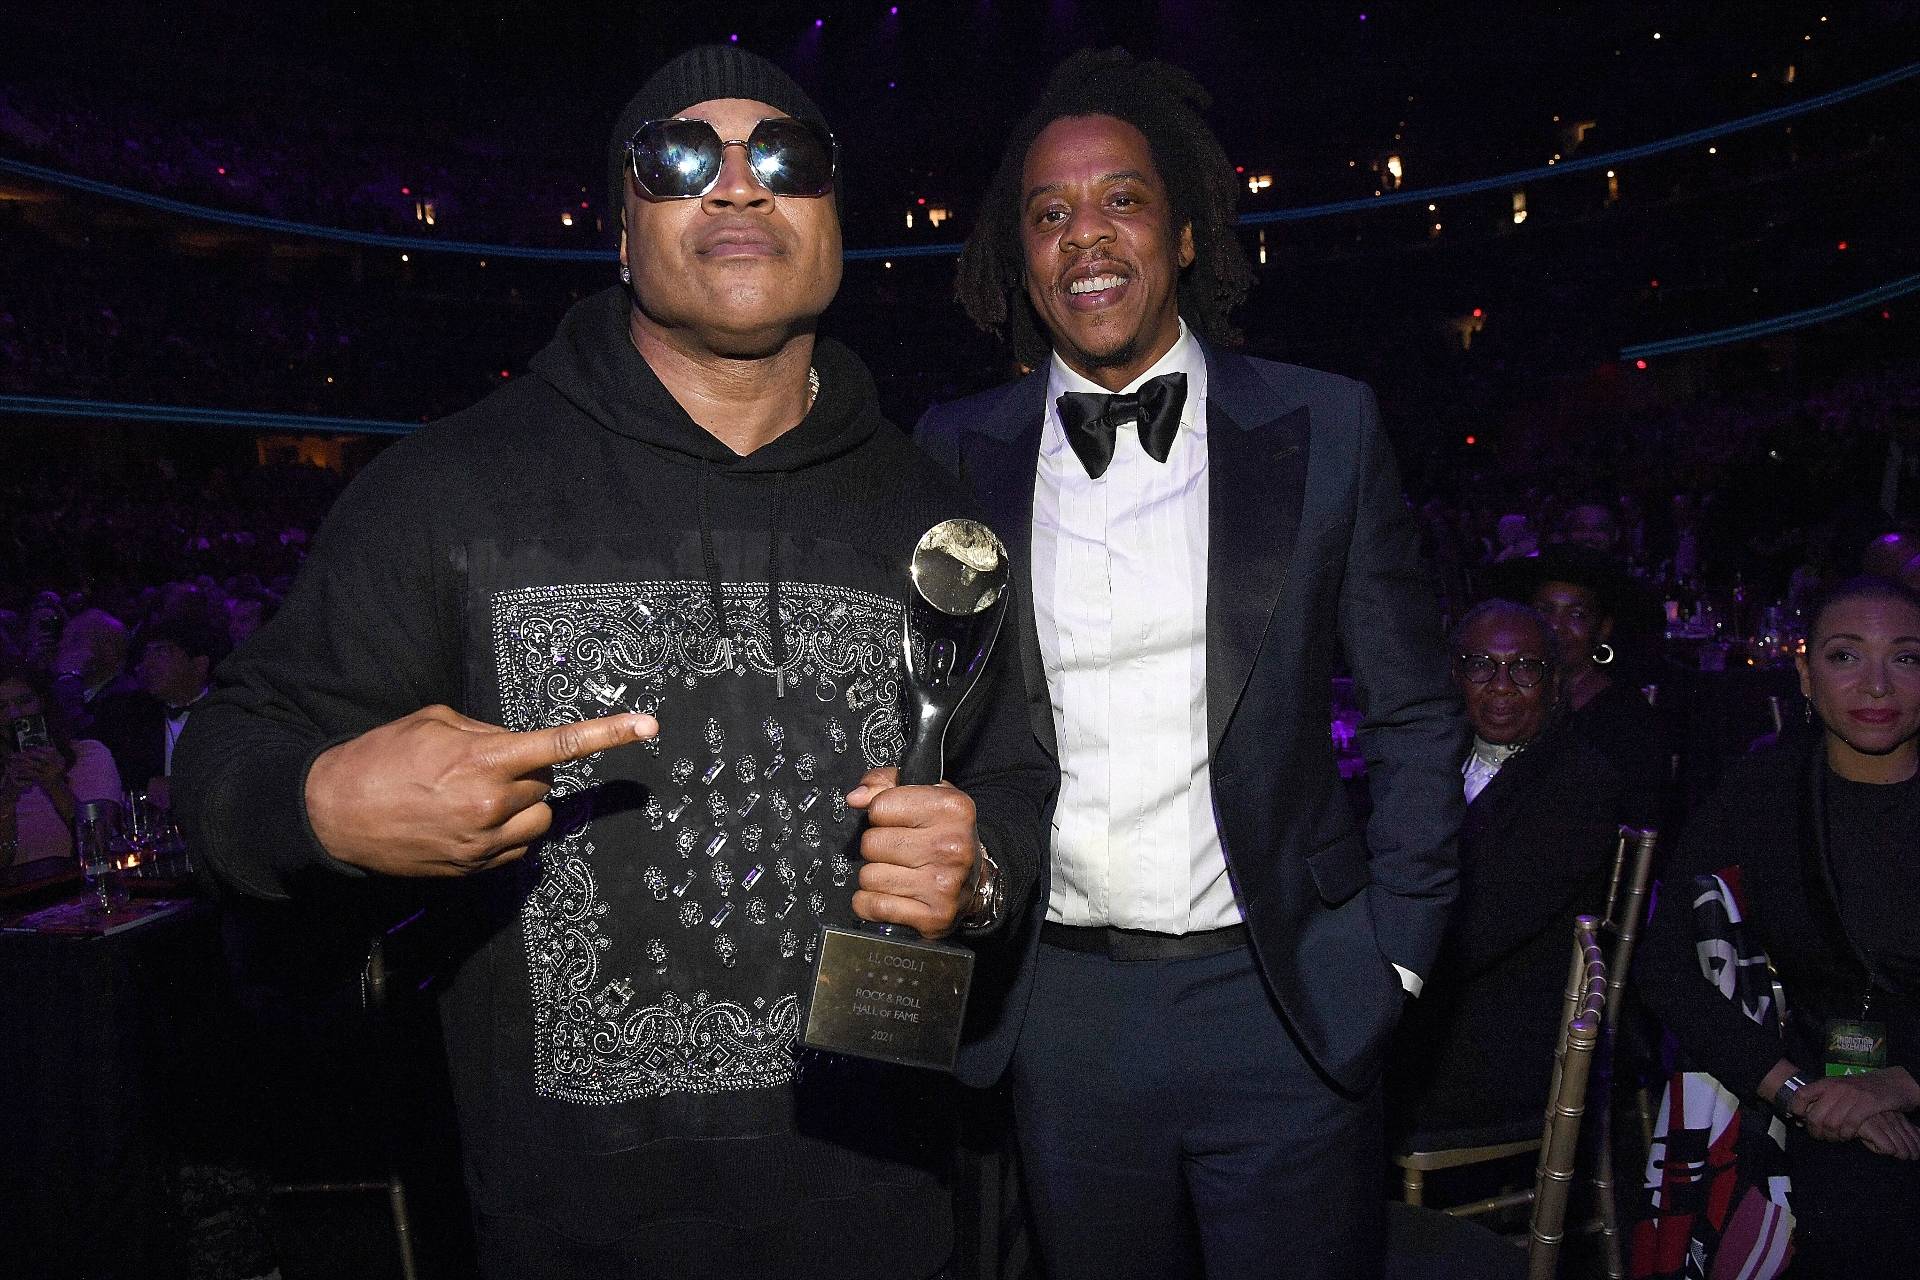 Jay-Z And LL Cool J Further Cement Hip Hop In The Culture At 2021 Rock & Roll Hall Of Fame Induction